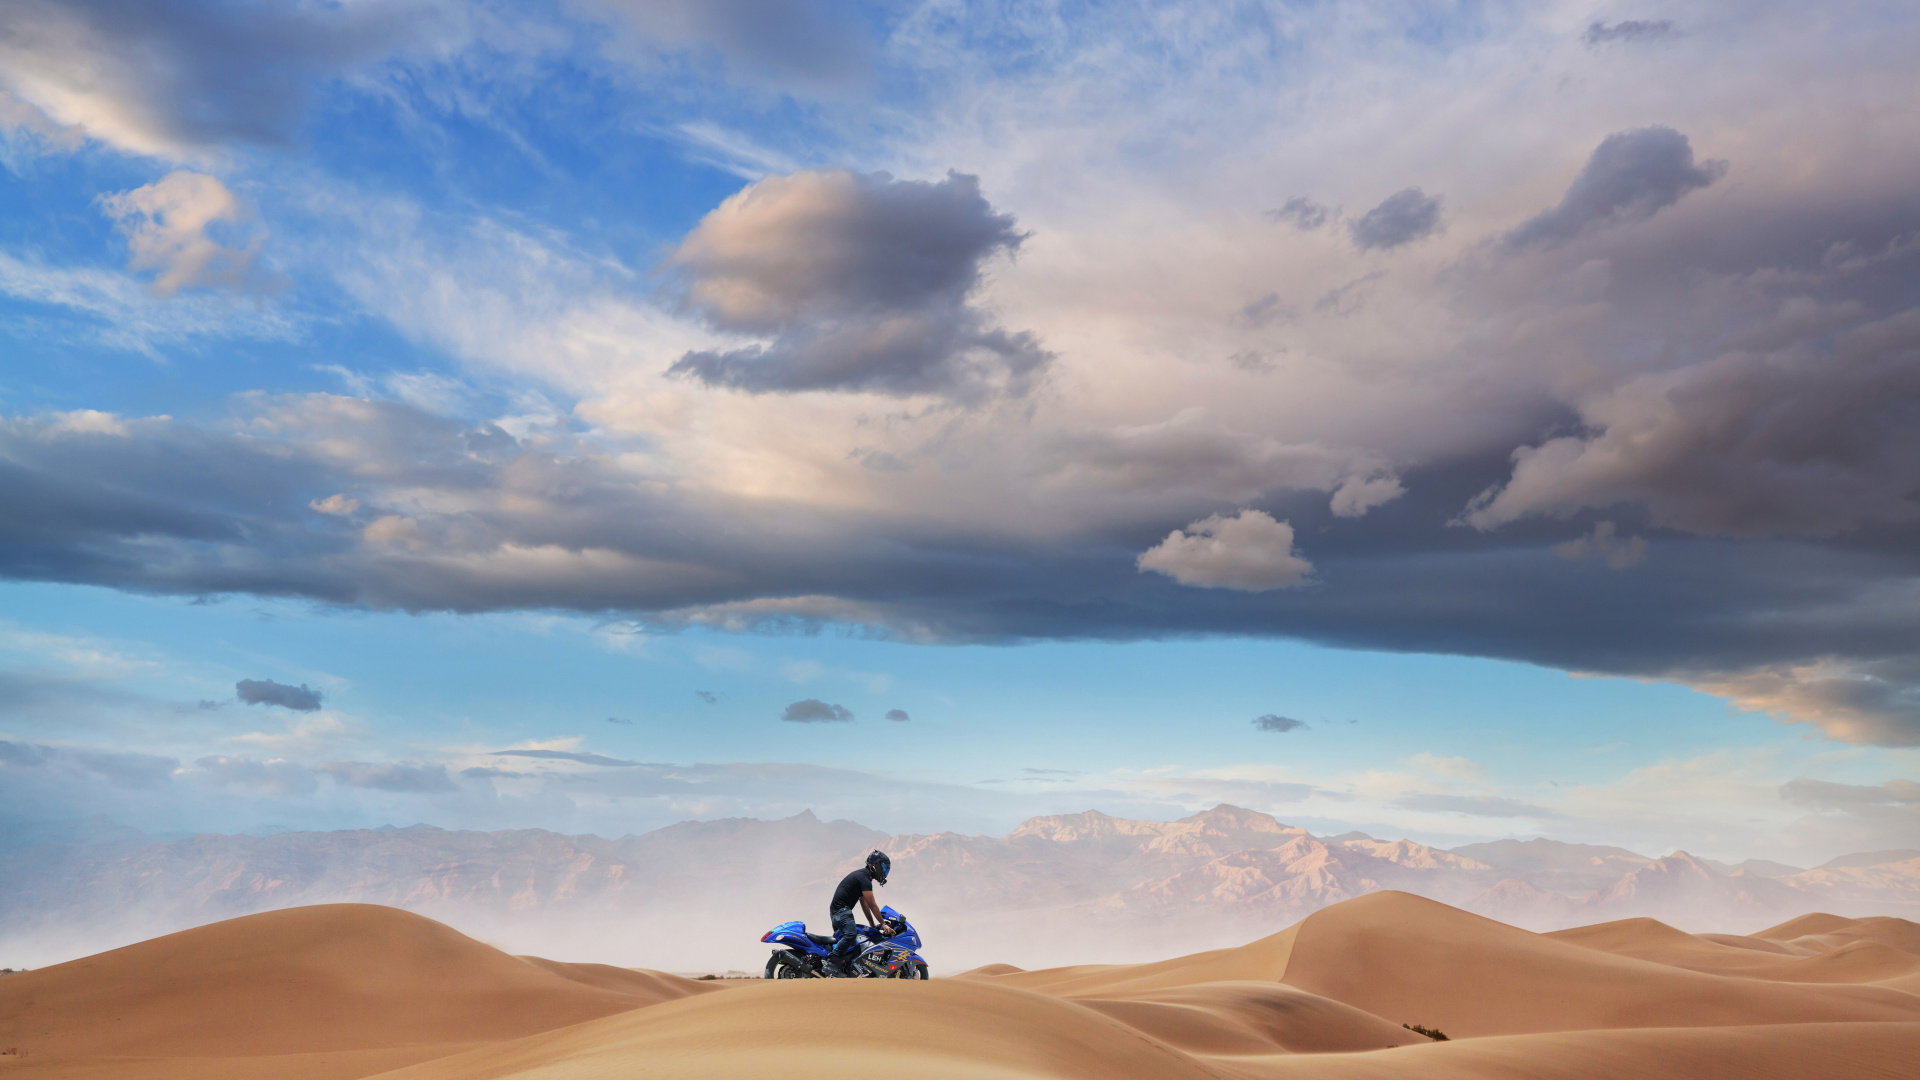 Man in Black Jacket and Black Pants Sitting on Brown Sand Under Blue Sky During Daytime. Wallpaper in 1920x1080 Resolution